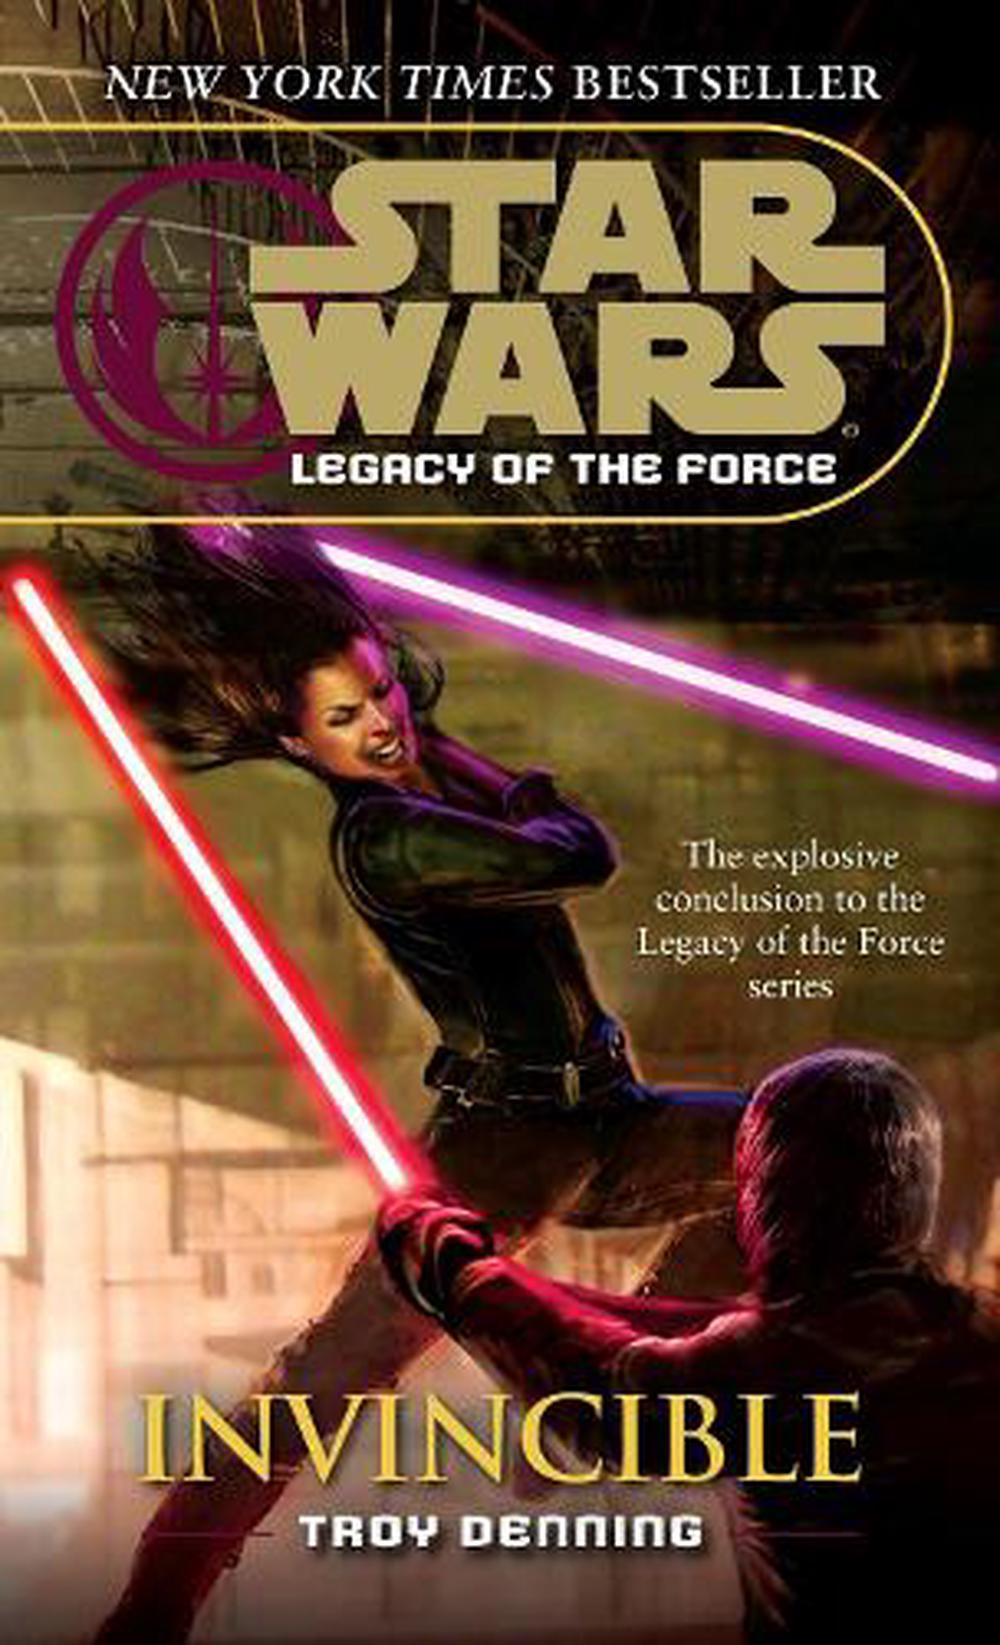 Star Wars: Legacy of the Force - Legends: Invincible: Star Wars Legends (Legacy of the Force) (Series #9) (Paperback) - image 1 of 1